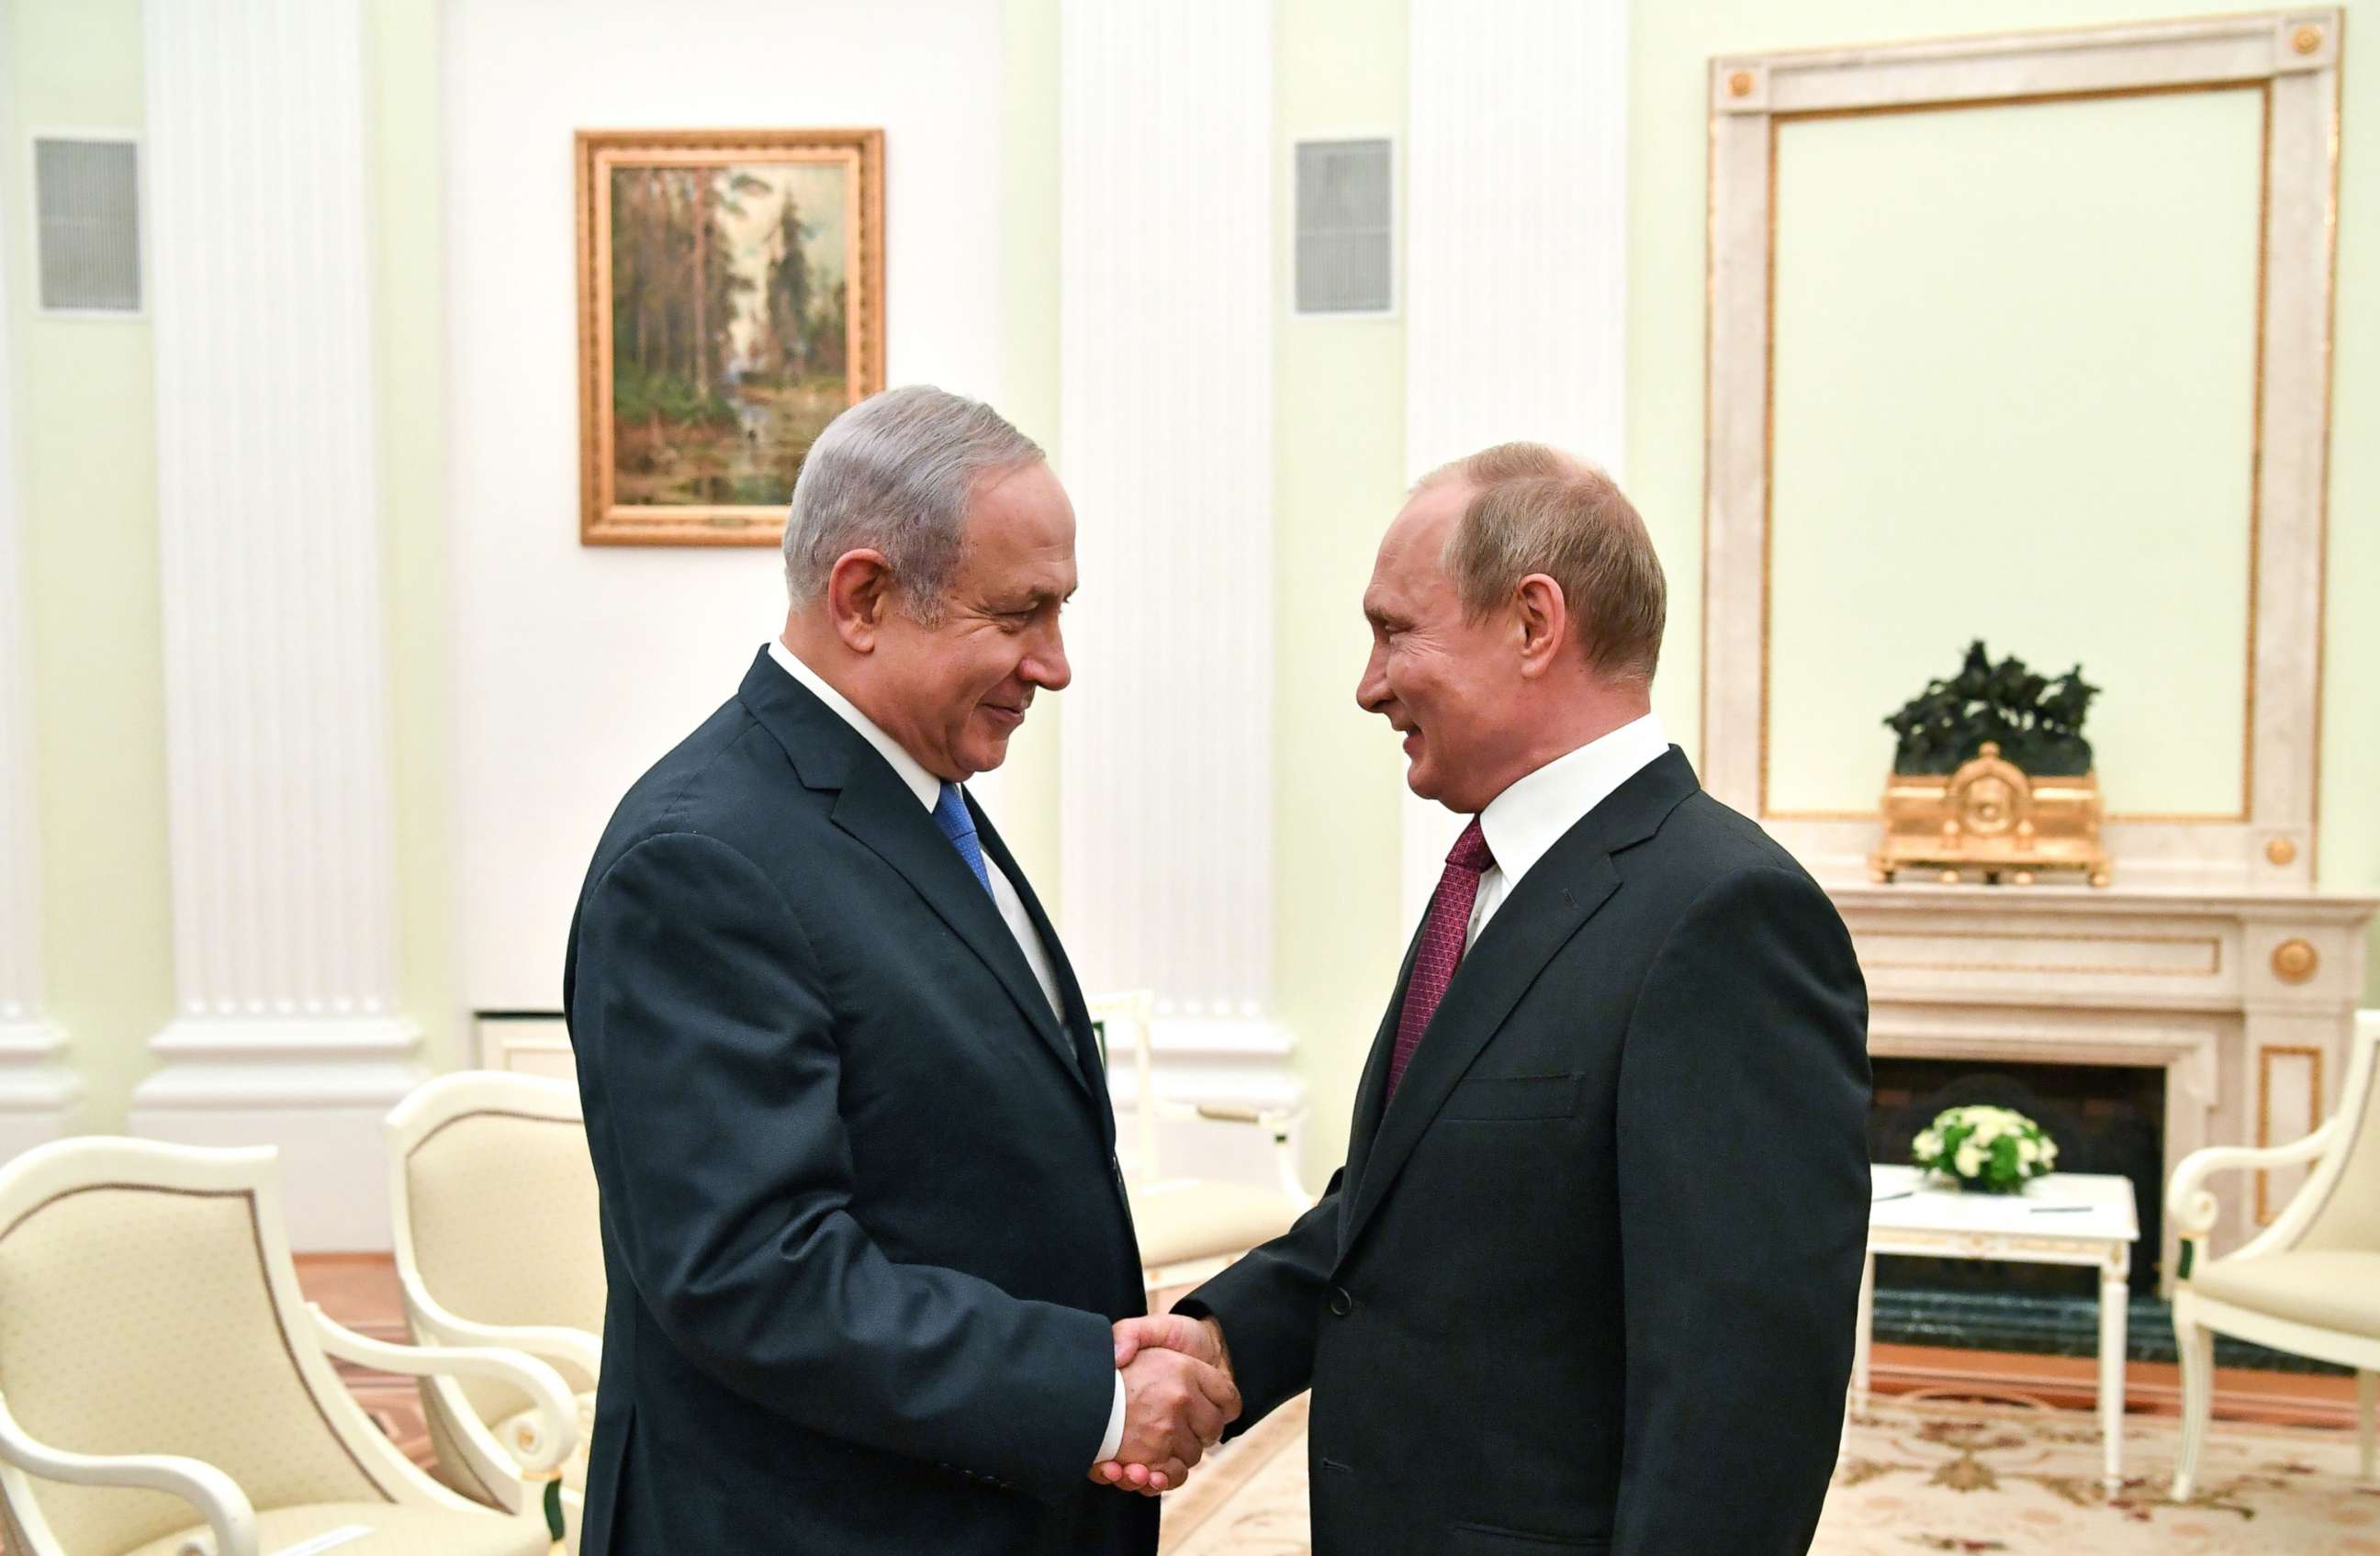 PHOTO: Russian President Vladimir Putin, right, shakes hands with Israeli Prime Minister Benjamin Netanyahu during their meeting at the Kremlin in Moscow on July 11, 2018.